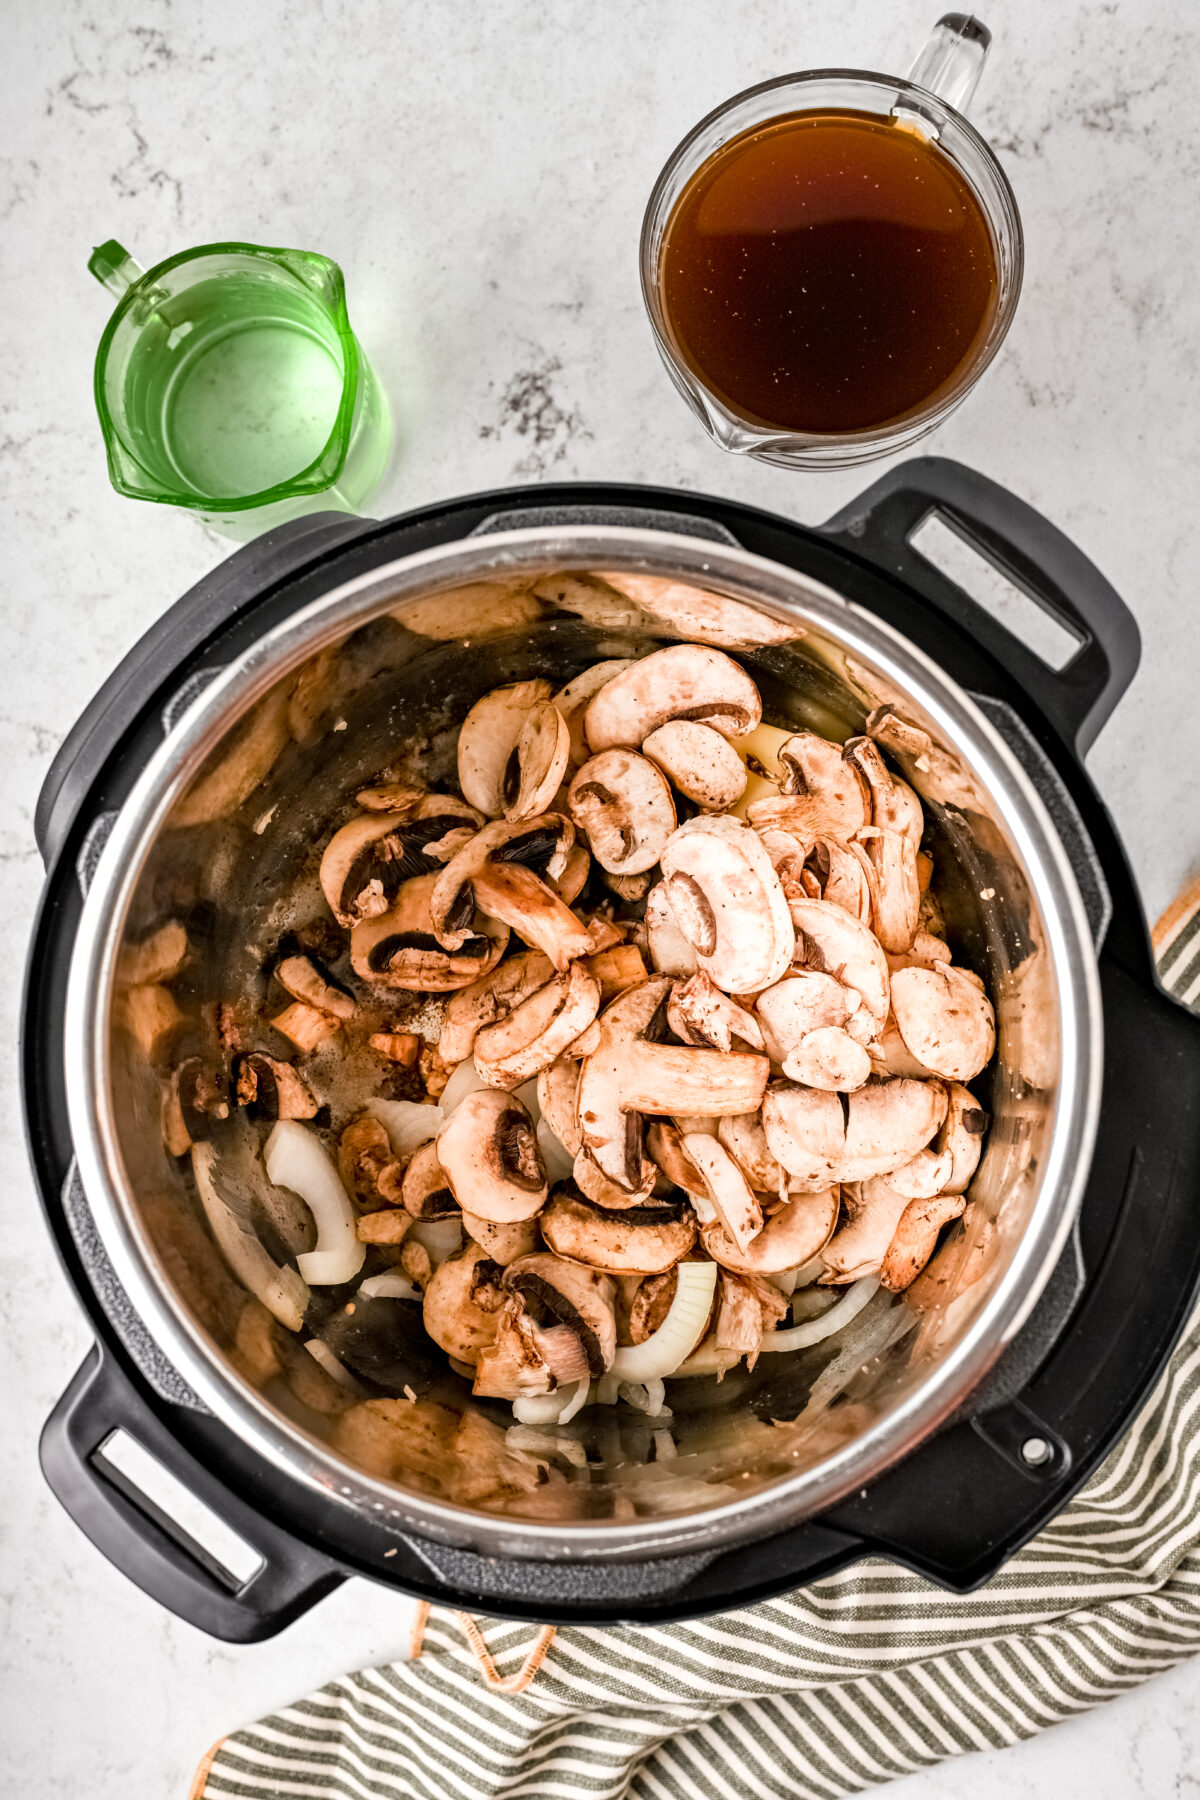 Mushrooms and onions in the instant pot.